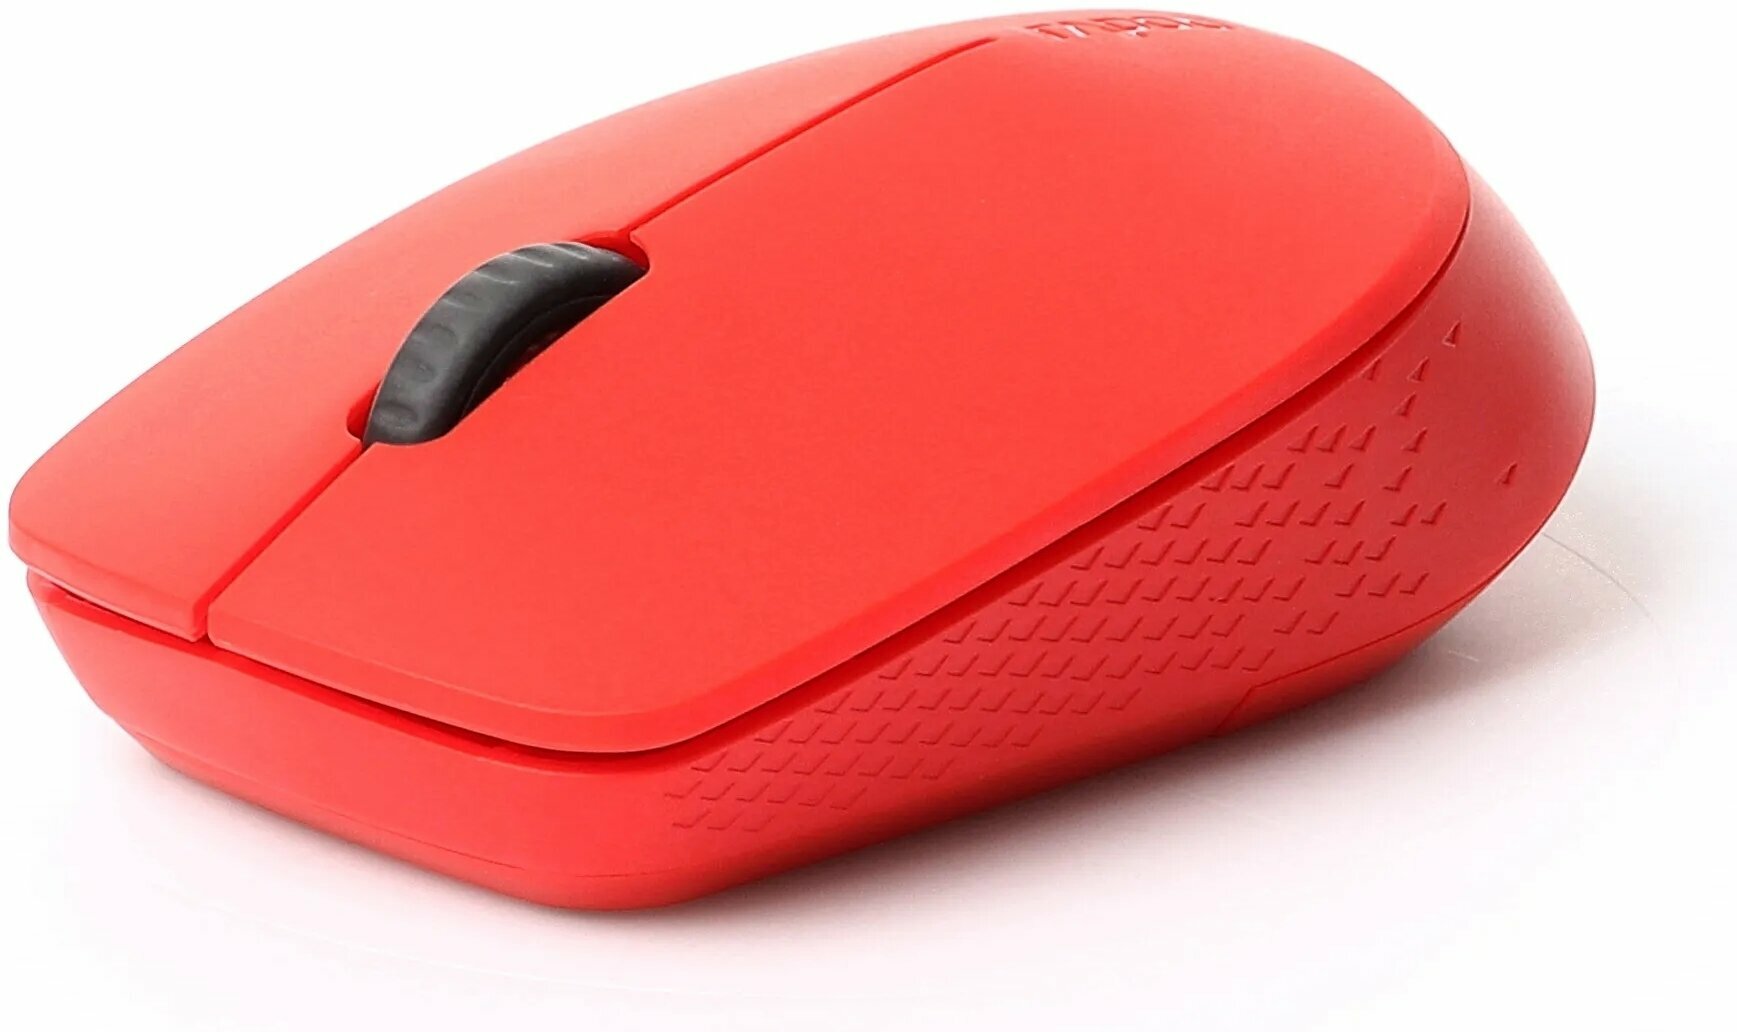 Muis Rapoo M100 Silent Red Muis